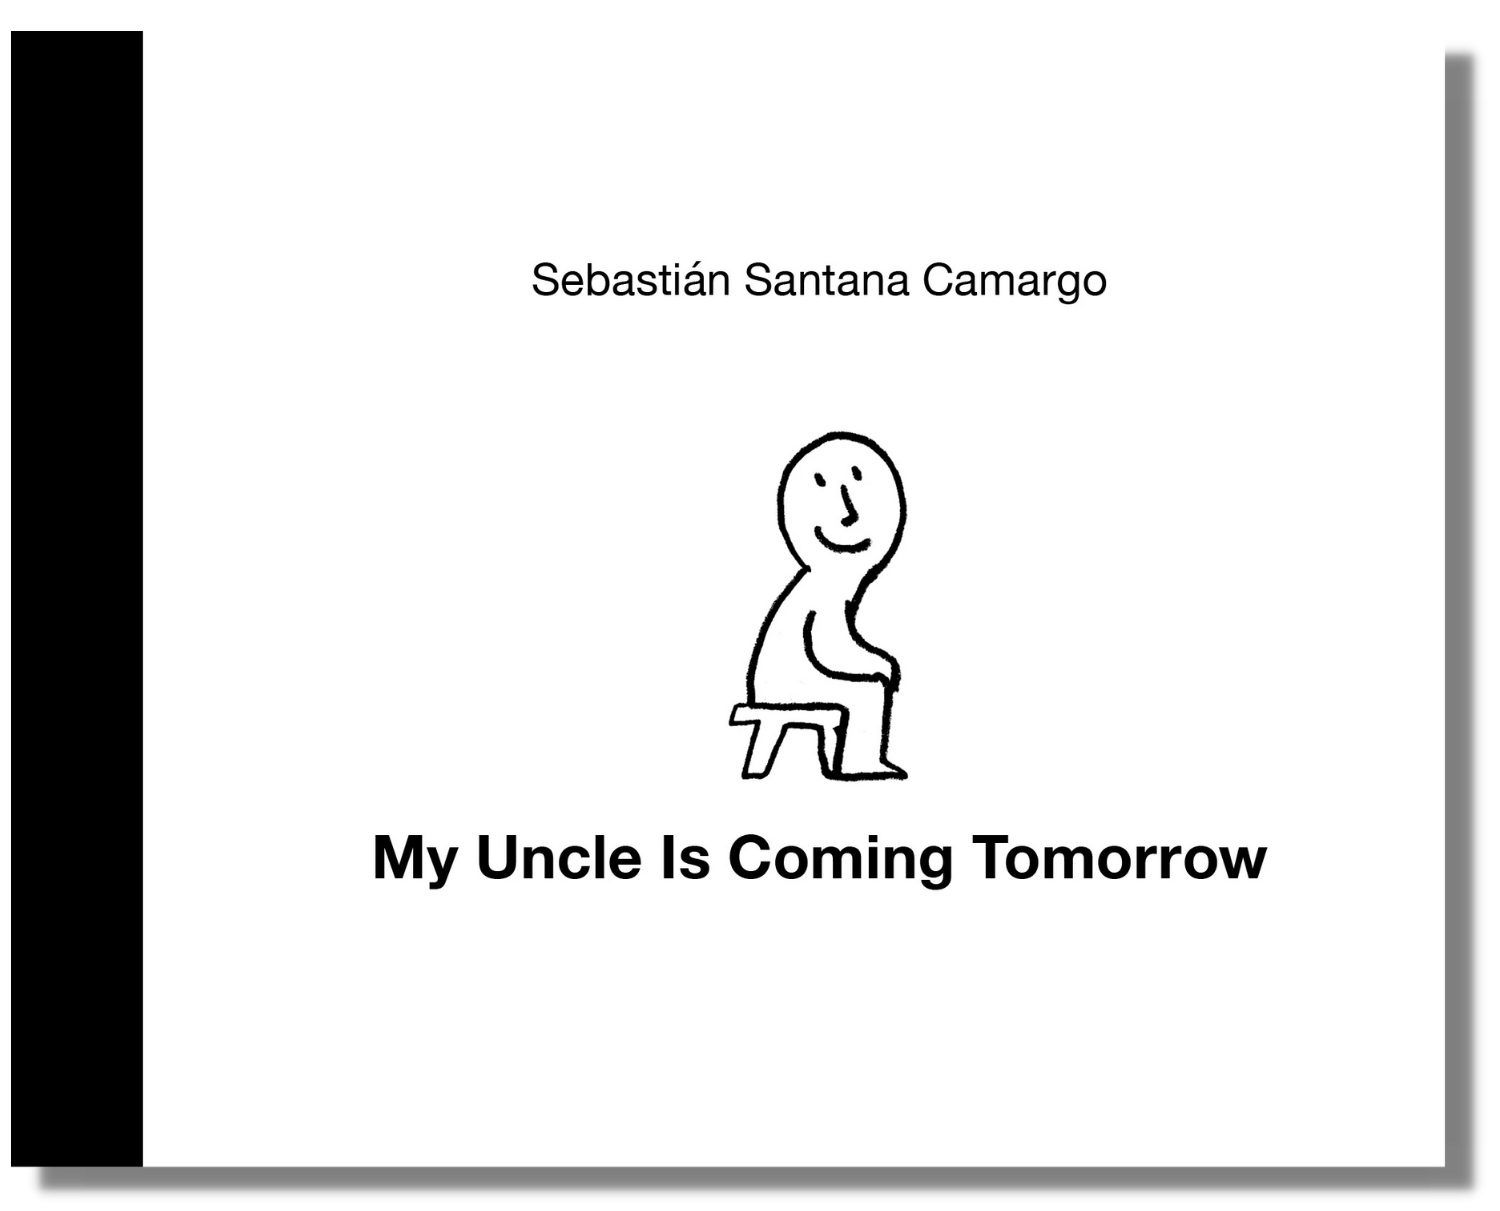 The cover of "My Uncle Is Coming Tomorrow"